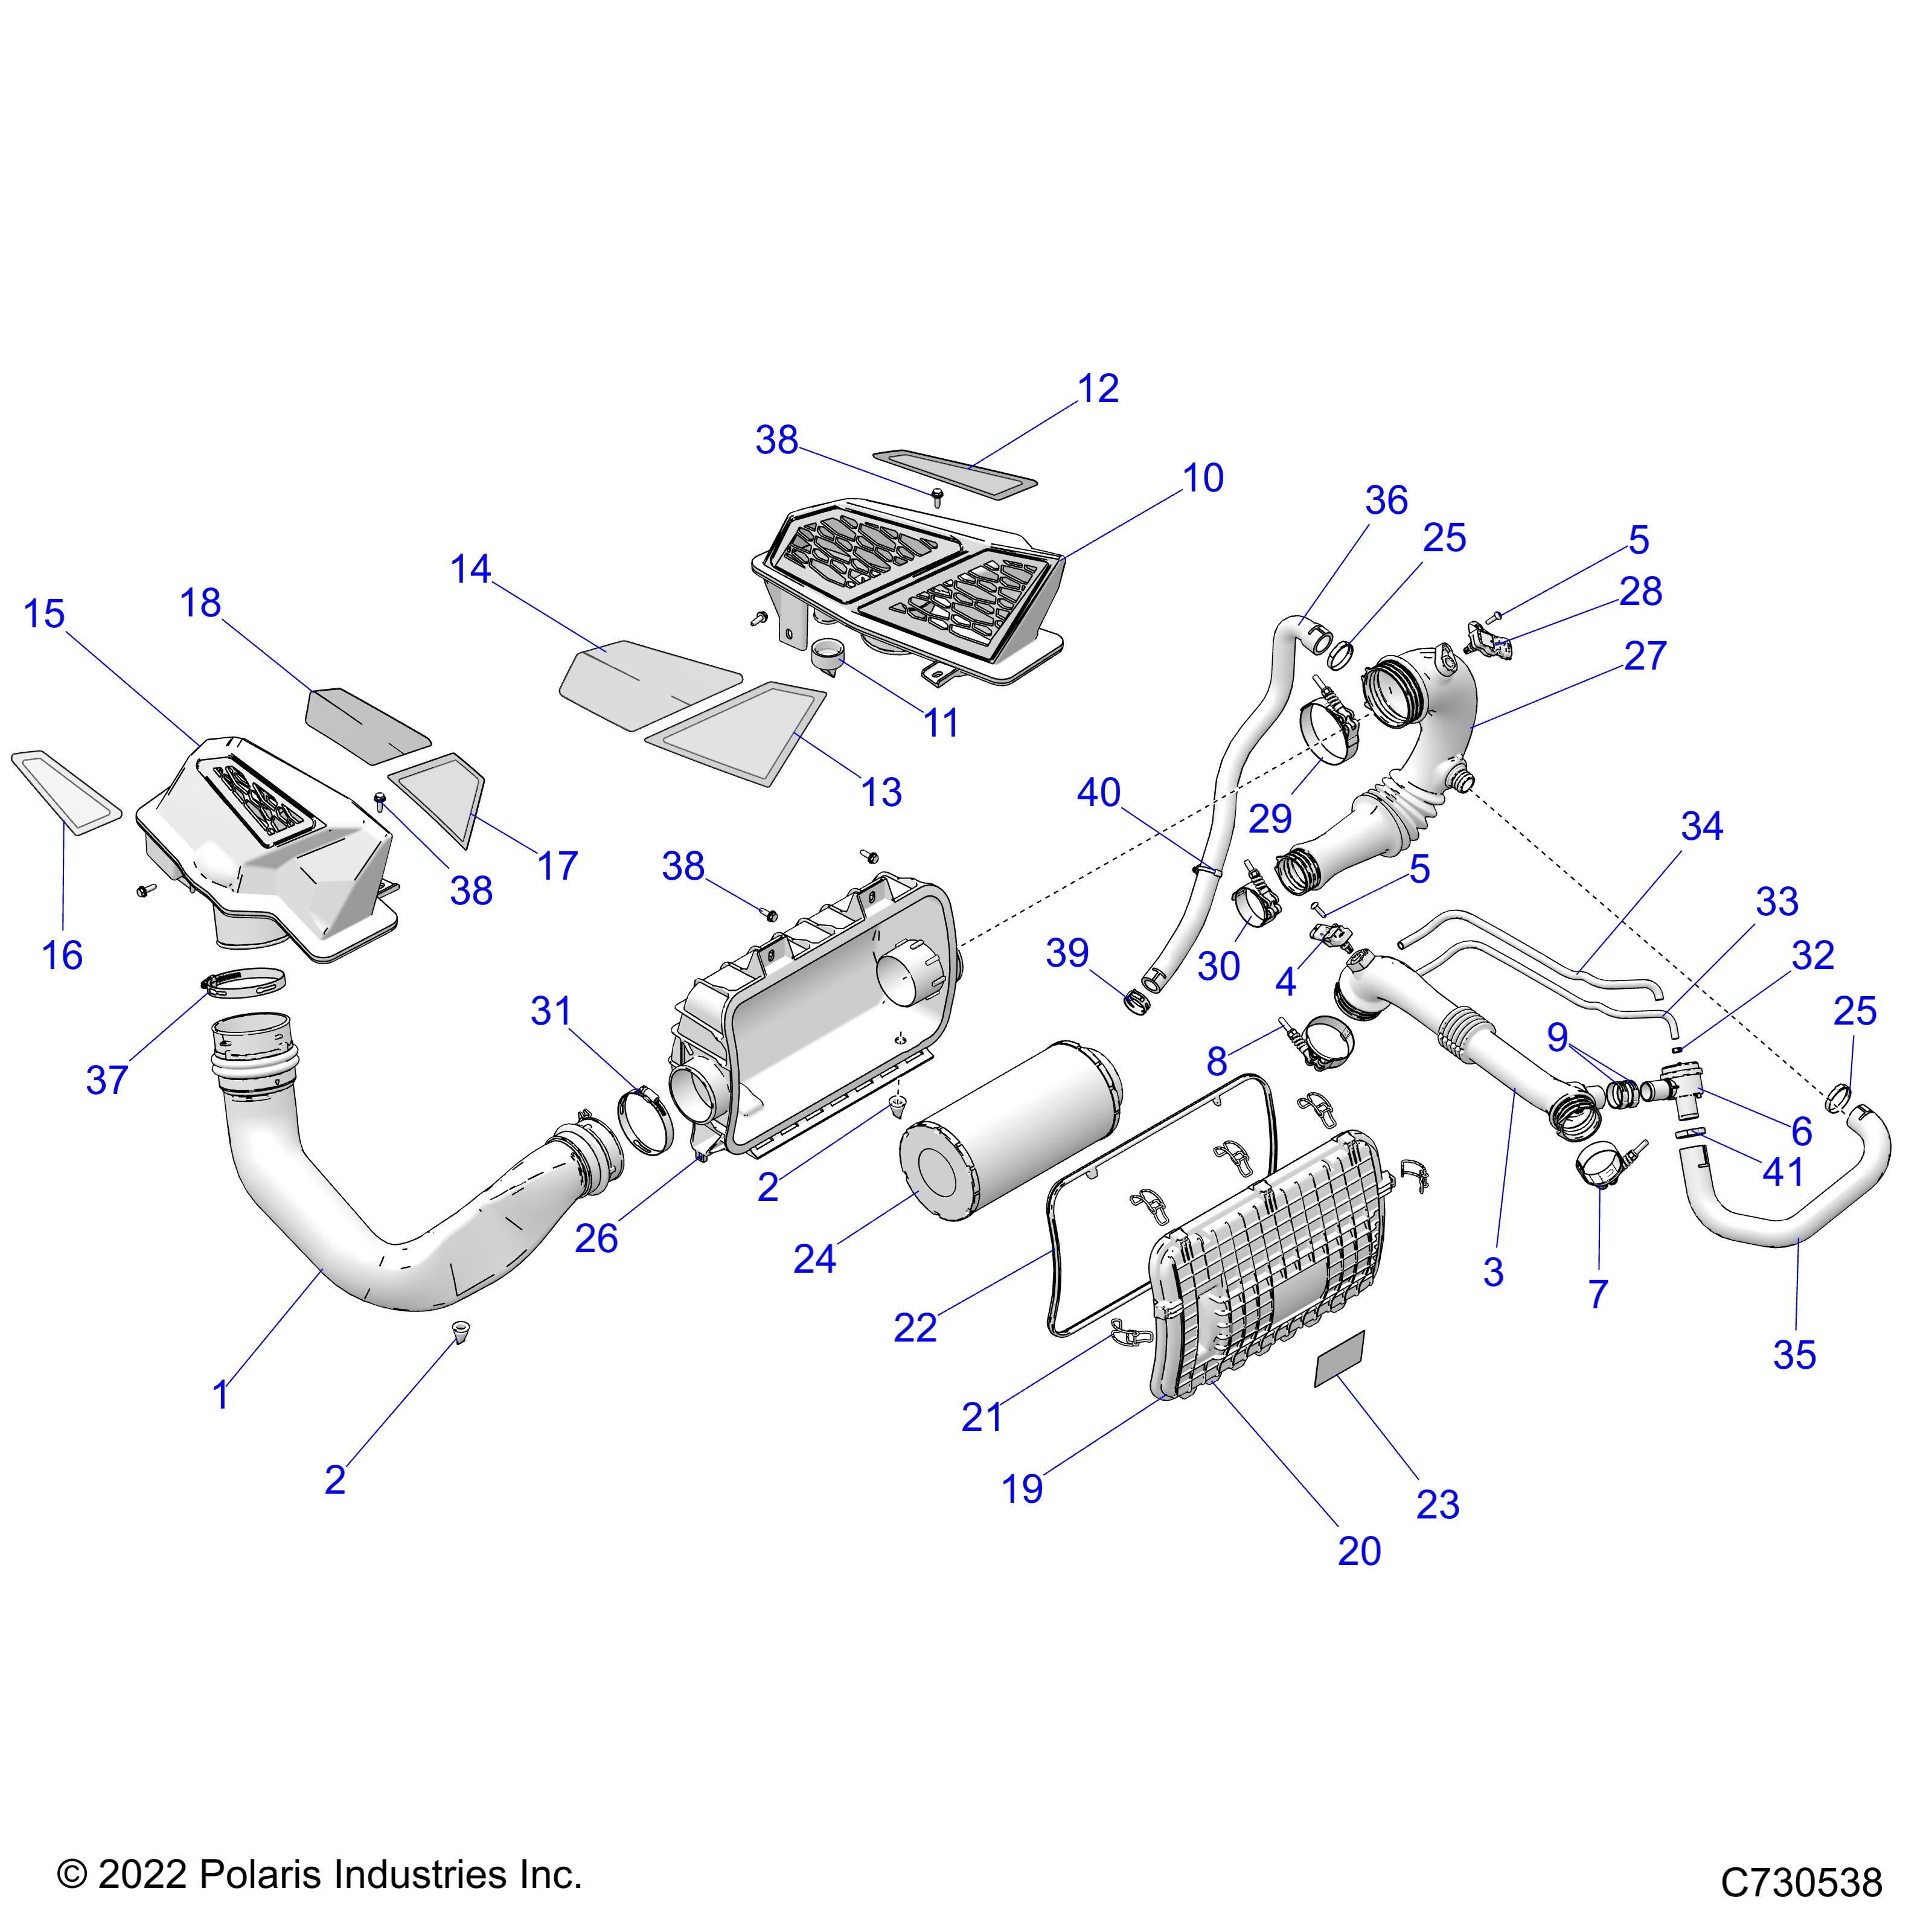 Part Number : 1241468 ASM-AIRBOX COVER